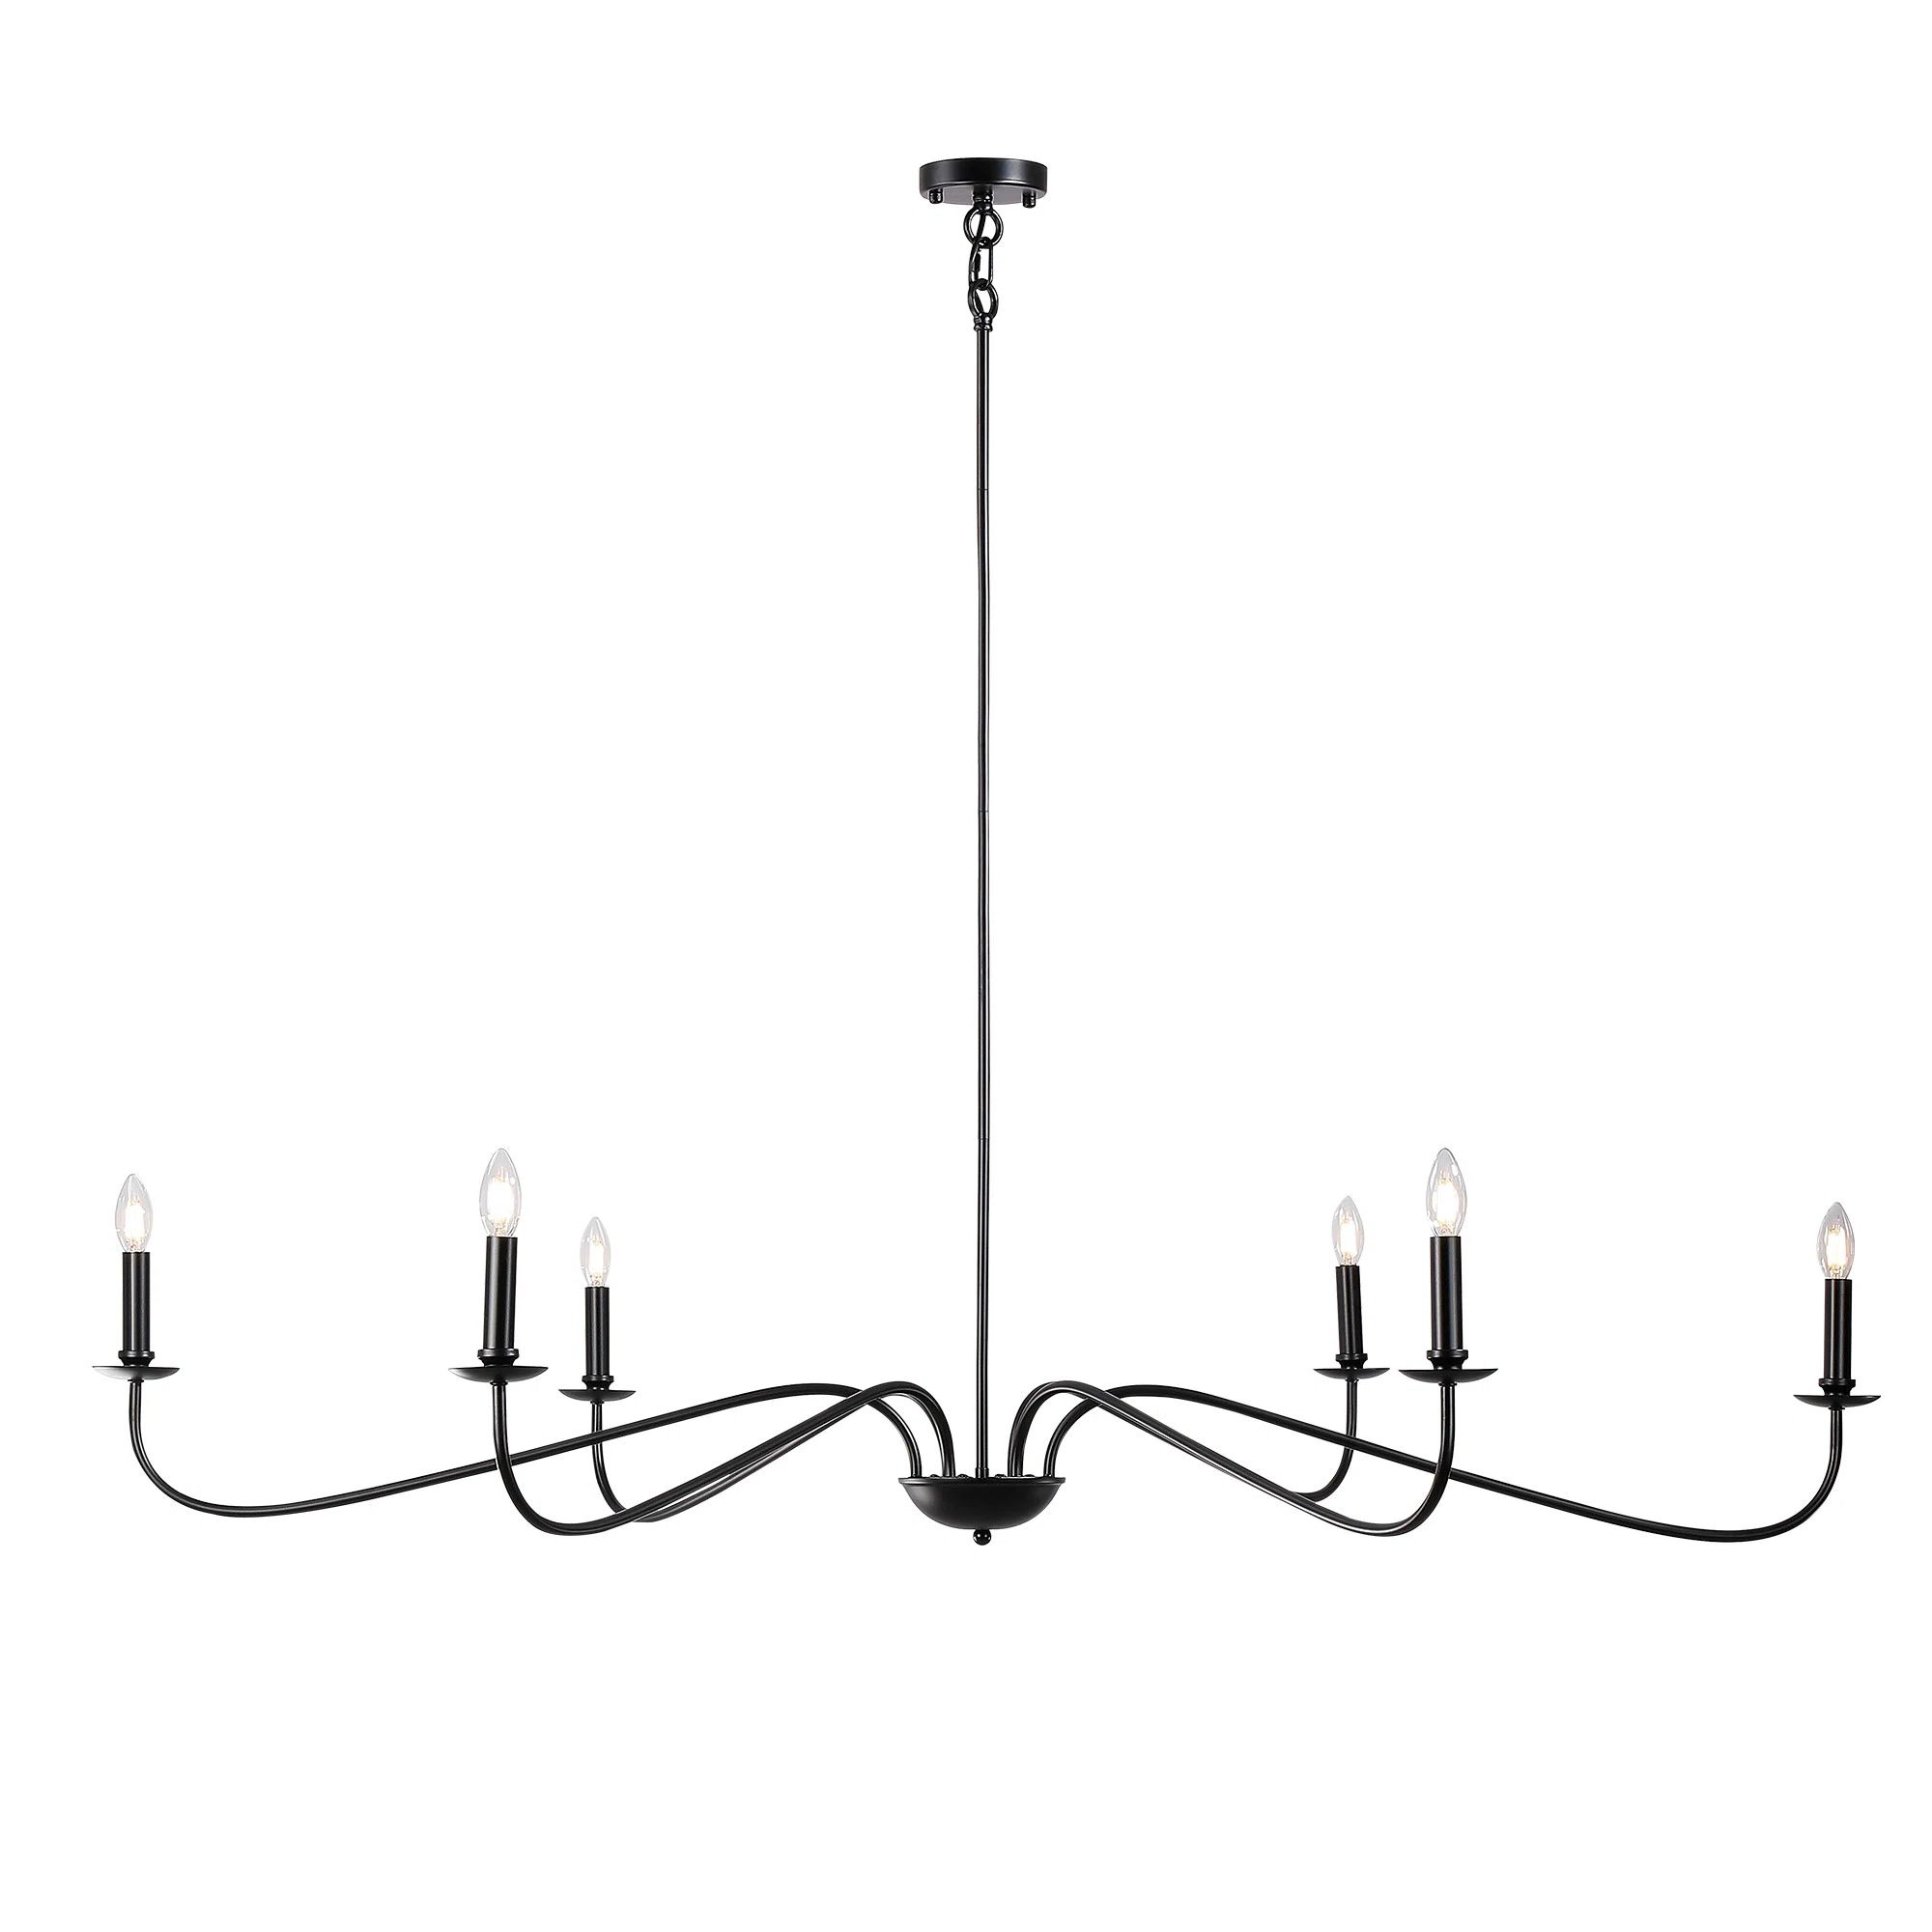 Emaani 6-Light Candle Chandeliers 64-Inch Width French Chic Style | Wayfair North America